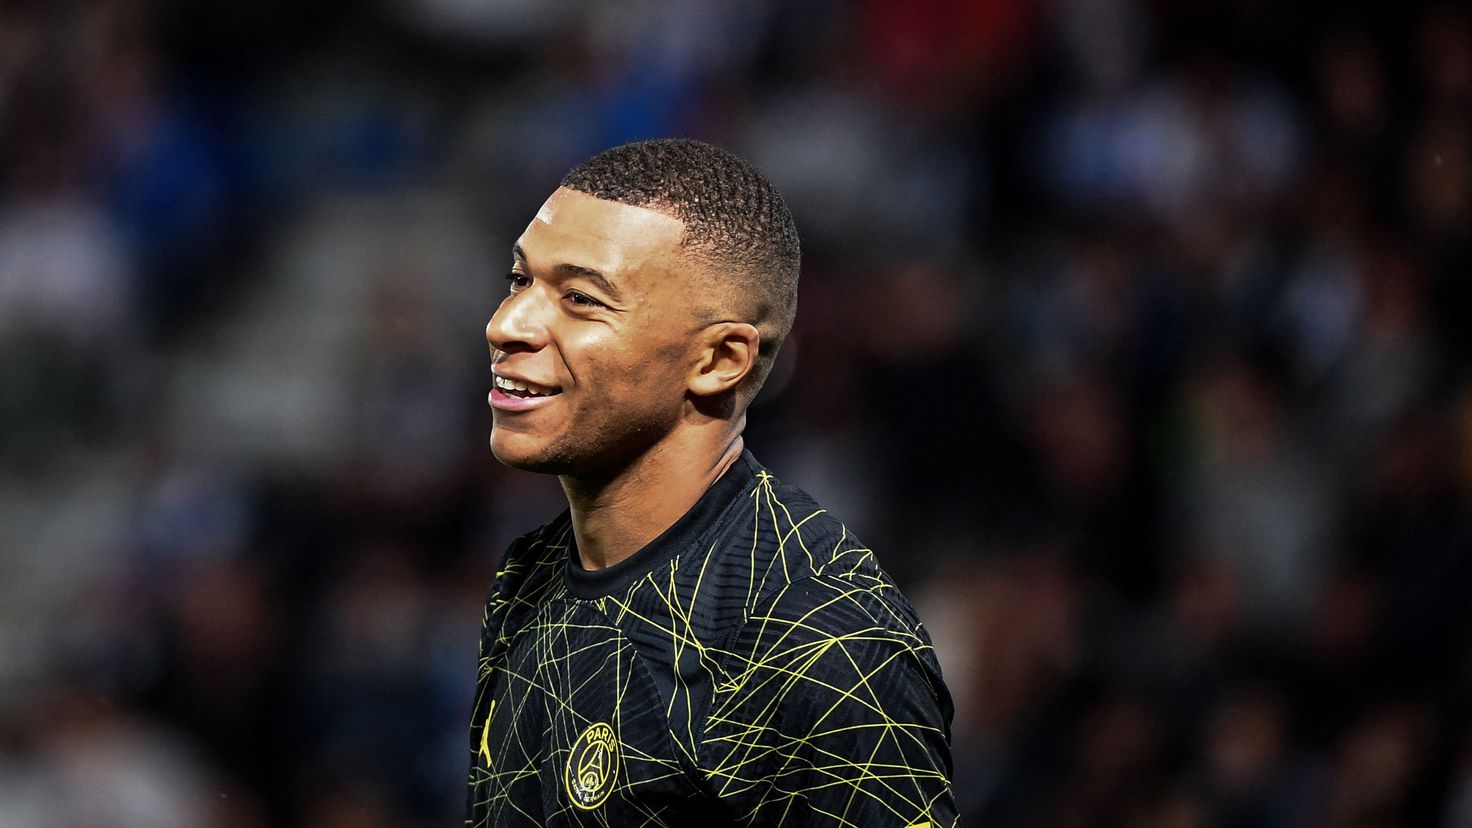 Not a euro for Mbappé
